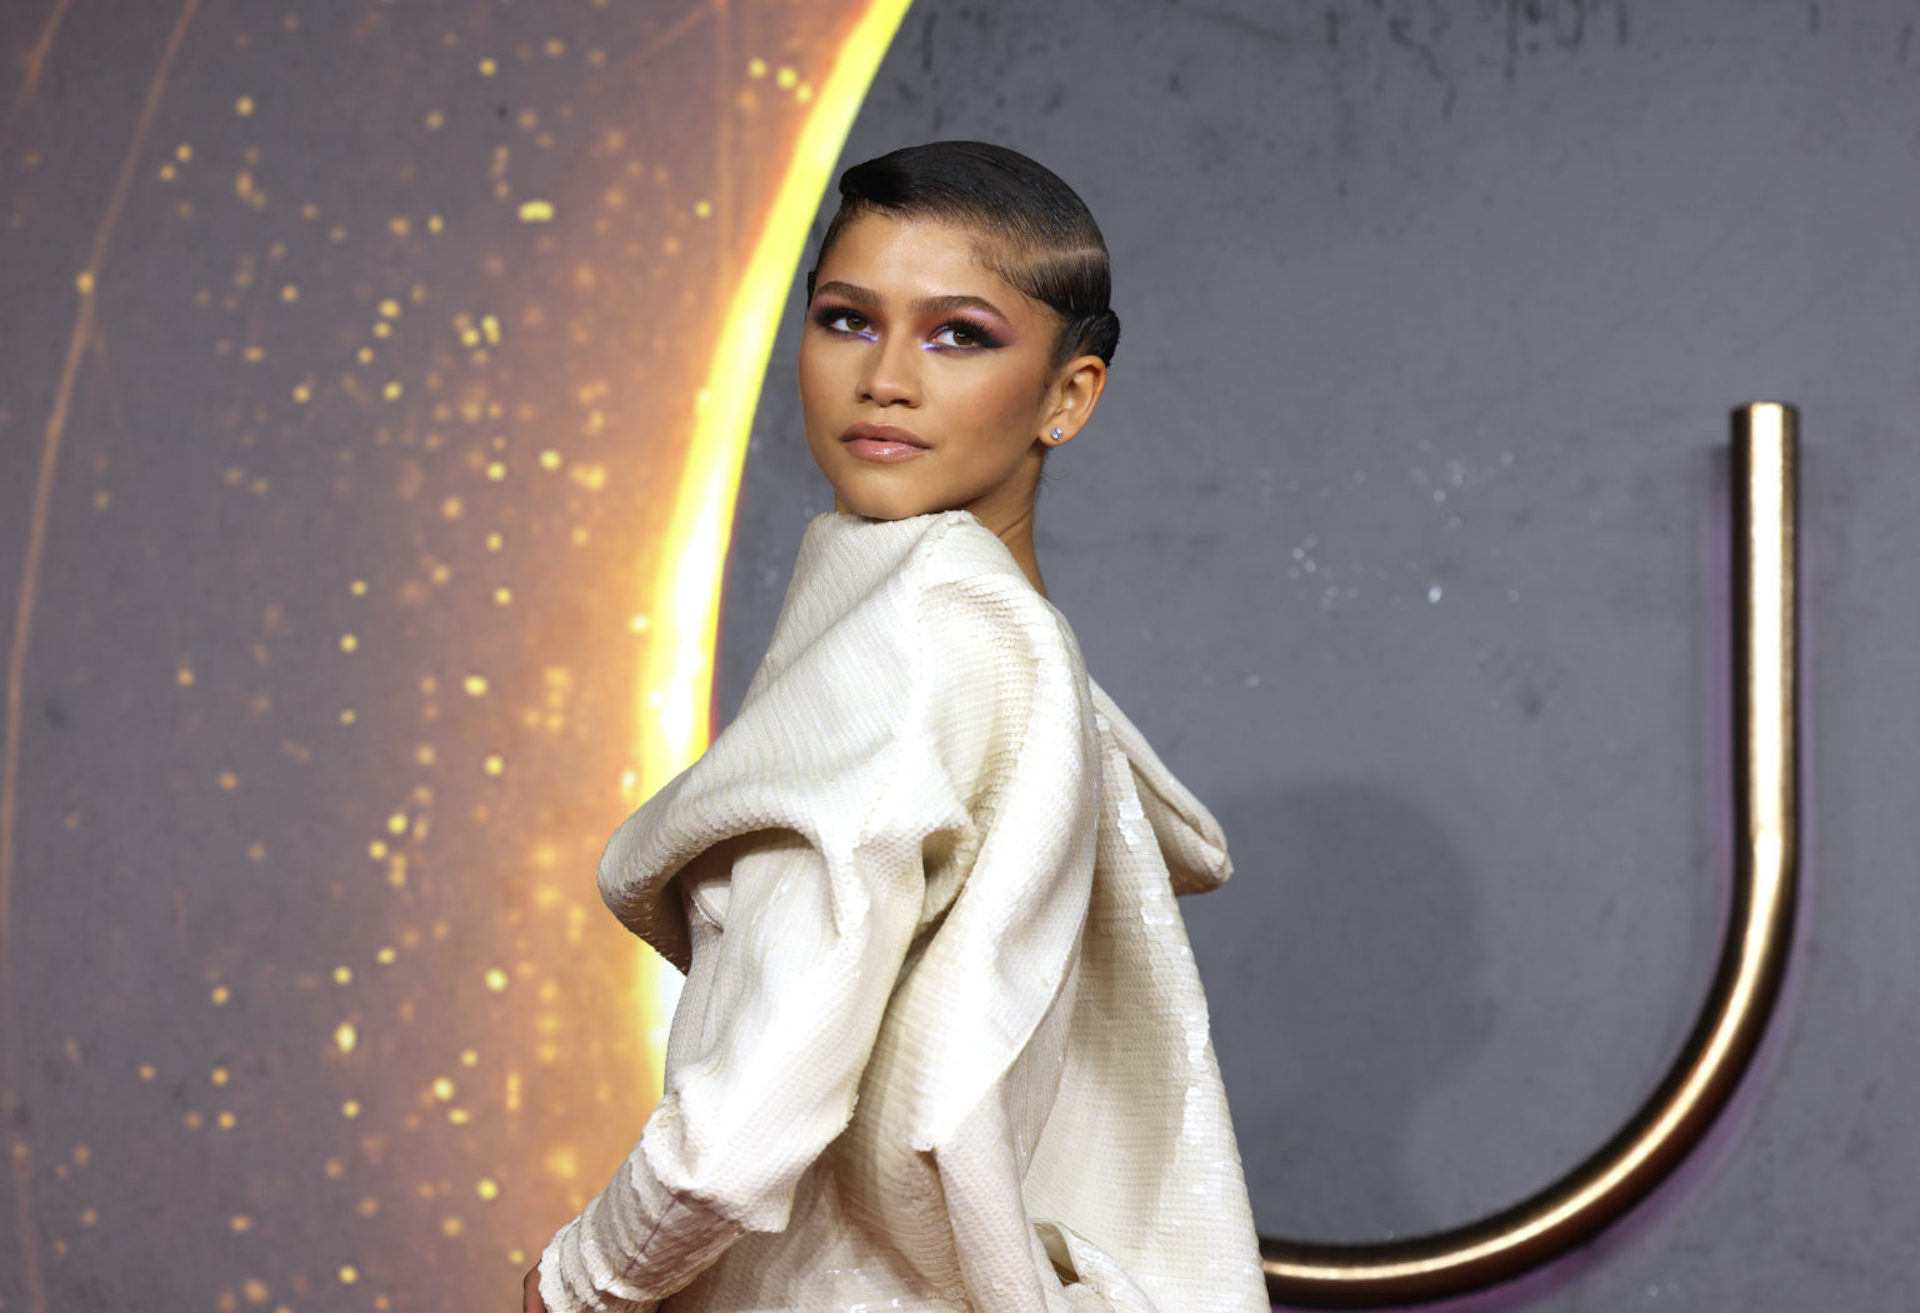 Zendaya will be featured in Labrinth's opening track to his album Ends & Begins. The track is titled 